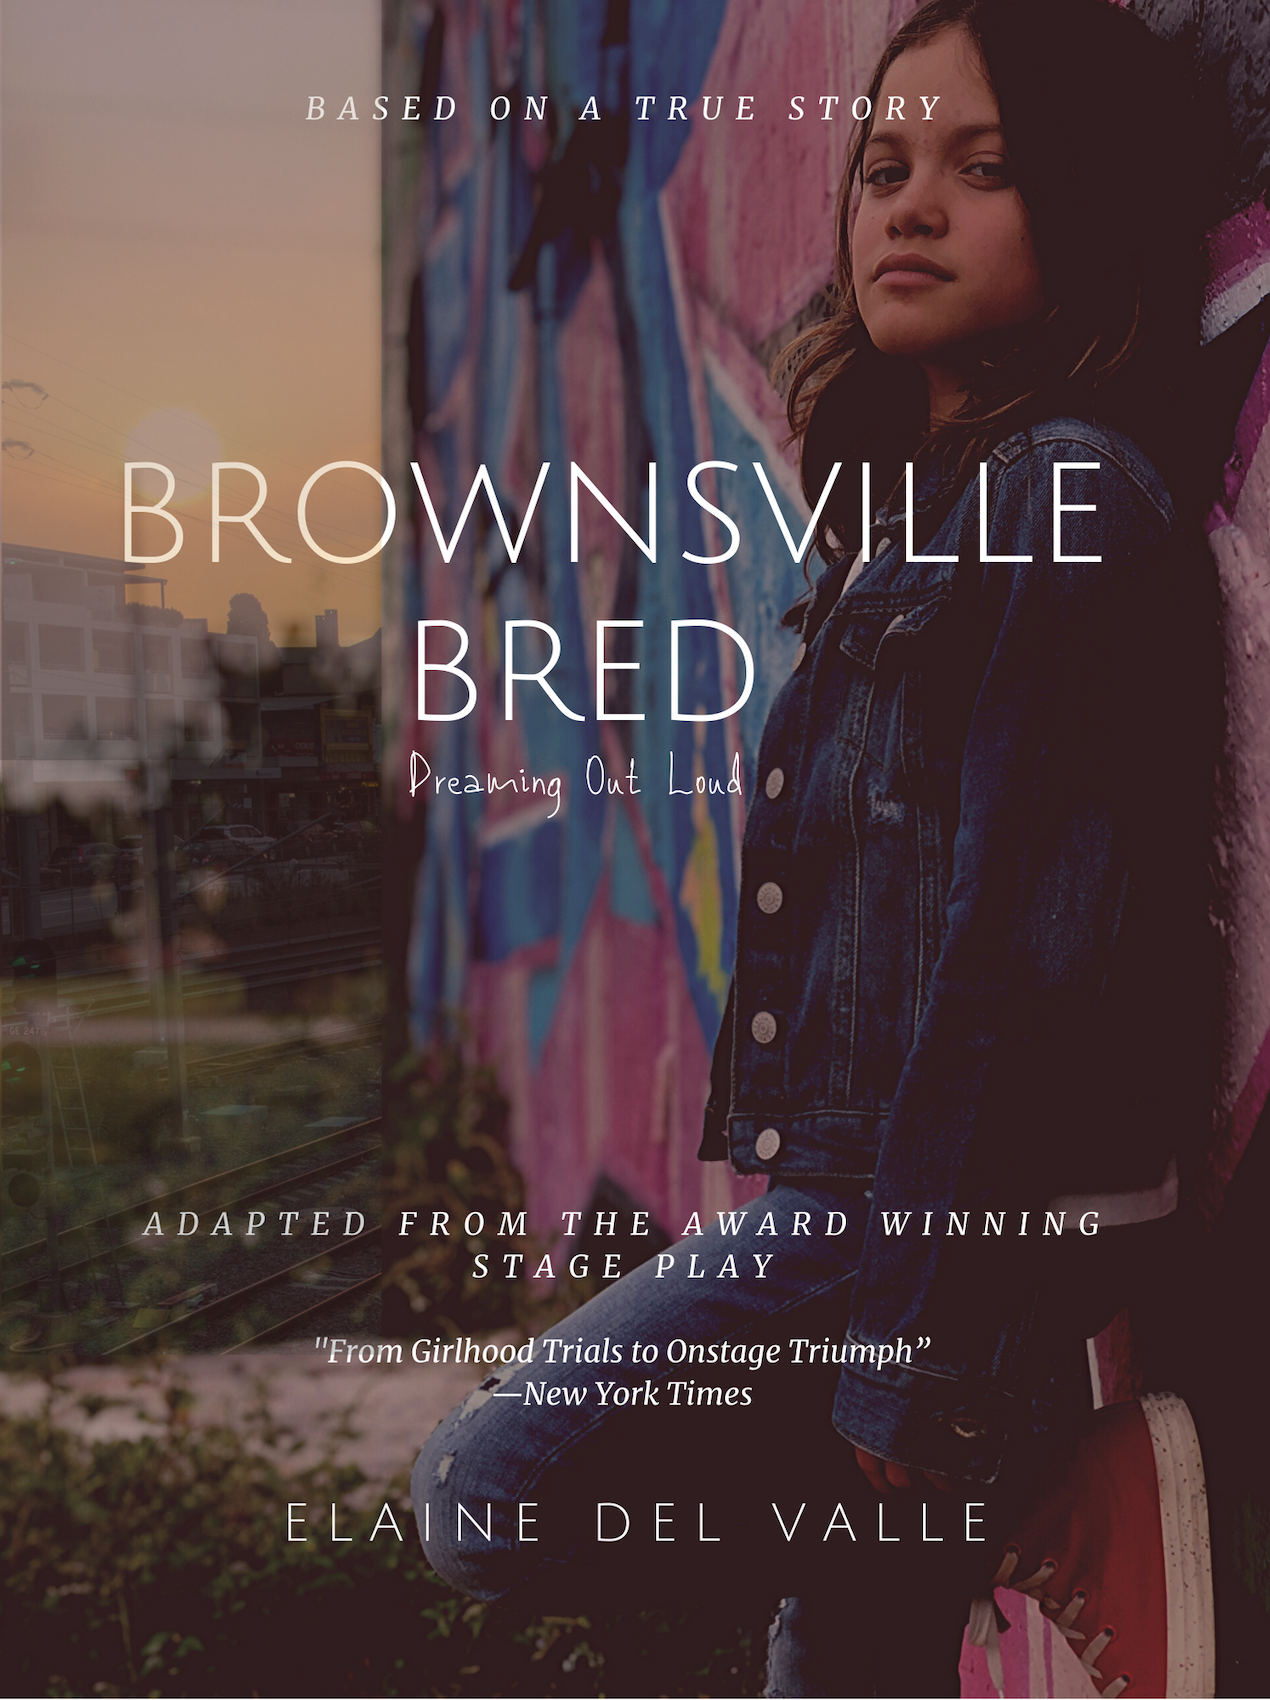 Brownsville Bred: Dreaming Out Loud (book cover)